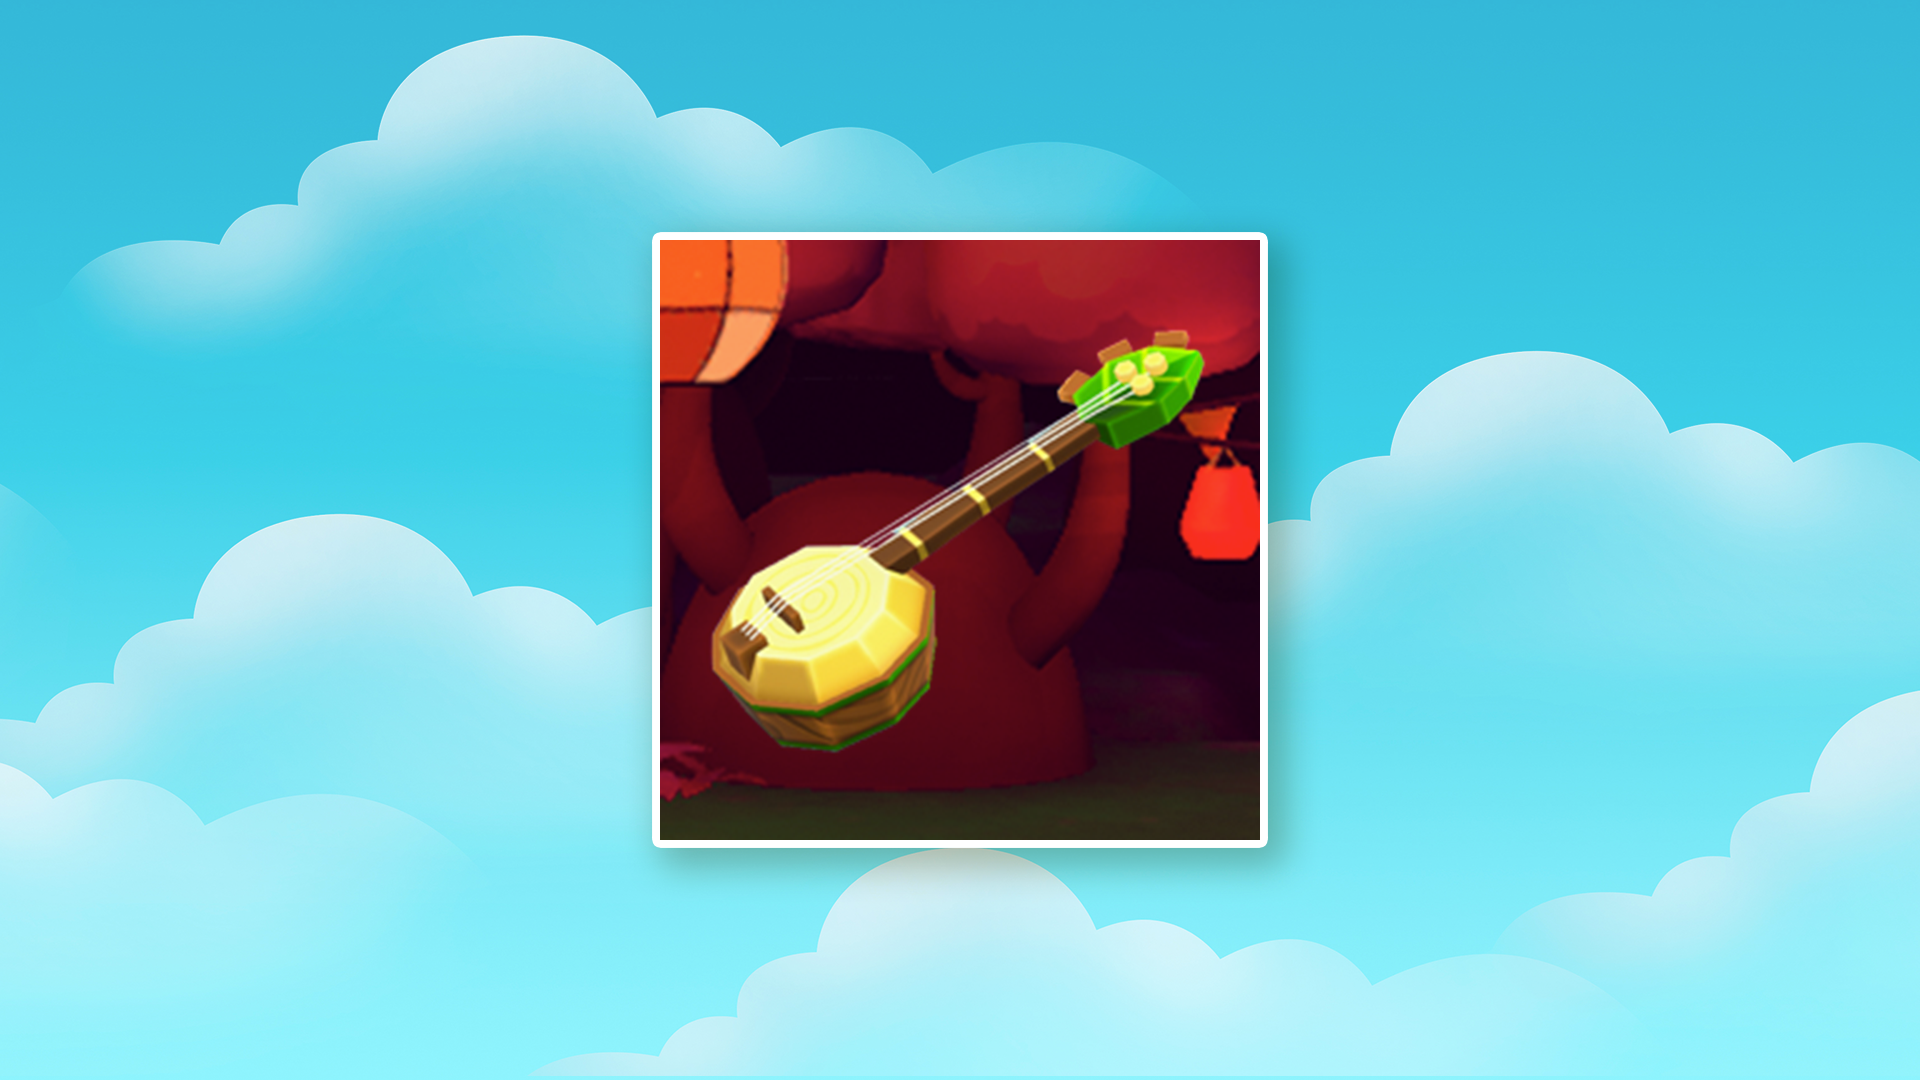 Icon for Guitar Hero